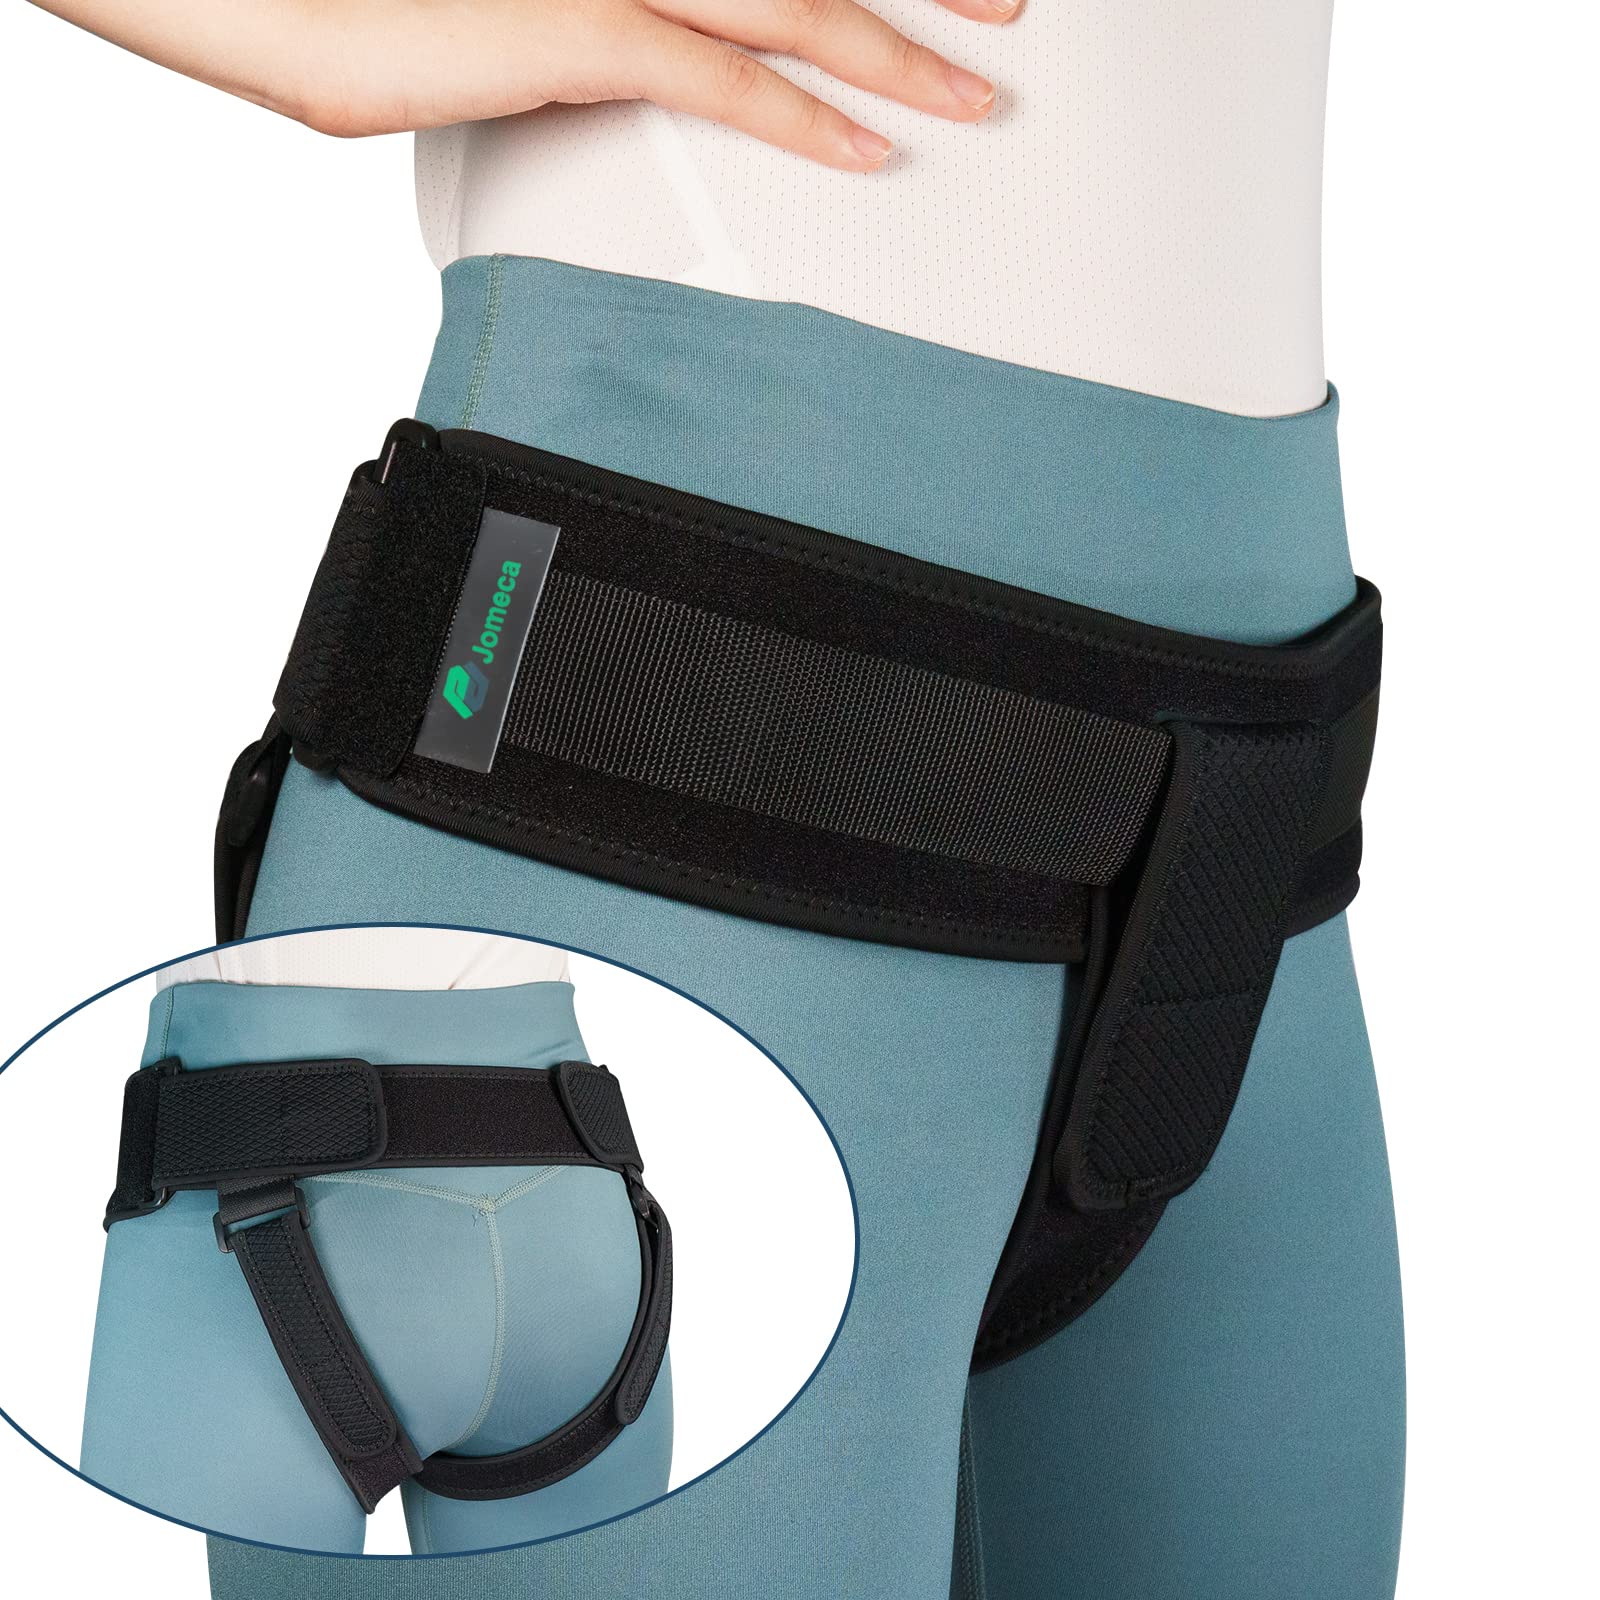 Strenbodi Pelvic Support Belt Pregnancy Belly Band for Treating Dropped  Bladder, Uterine Prolapse, Vulvar Varicosities, Postpartum and Symphysis  Pubis Dysfunction 